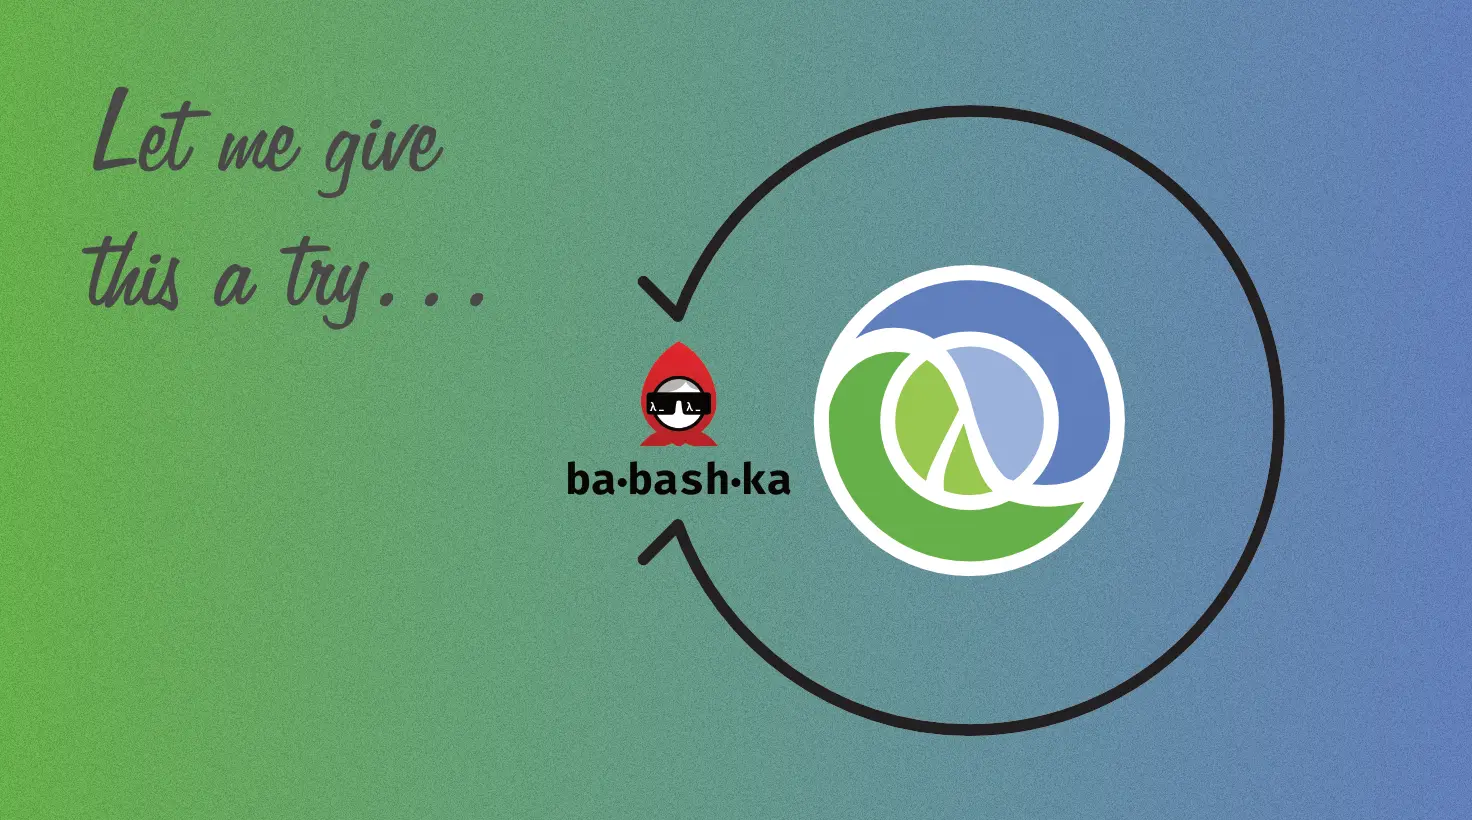 Babashka is a great Clojure entry point